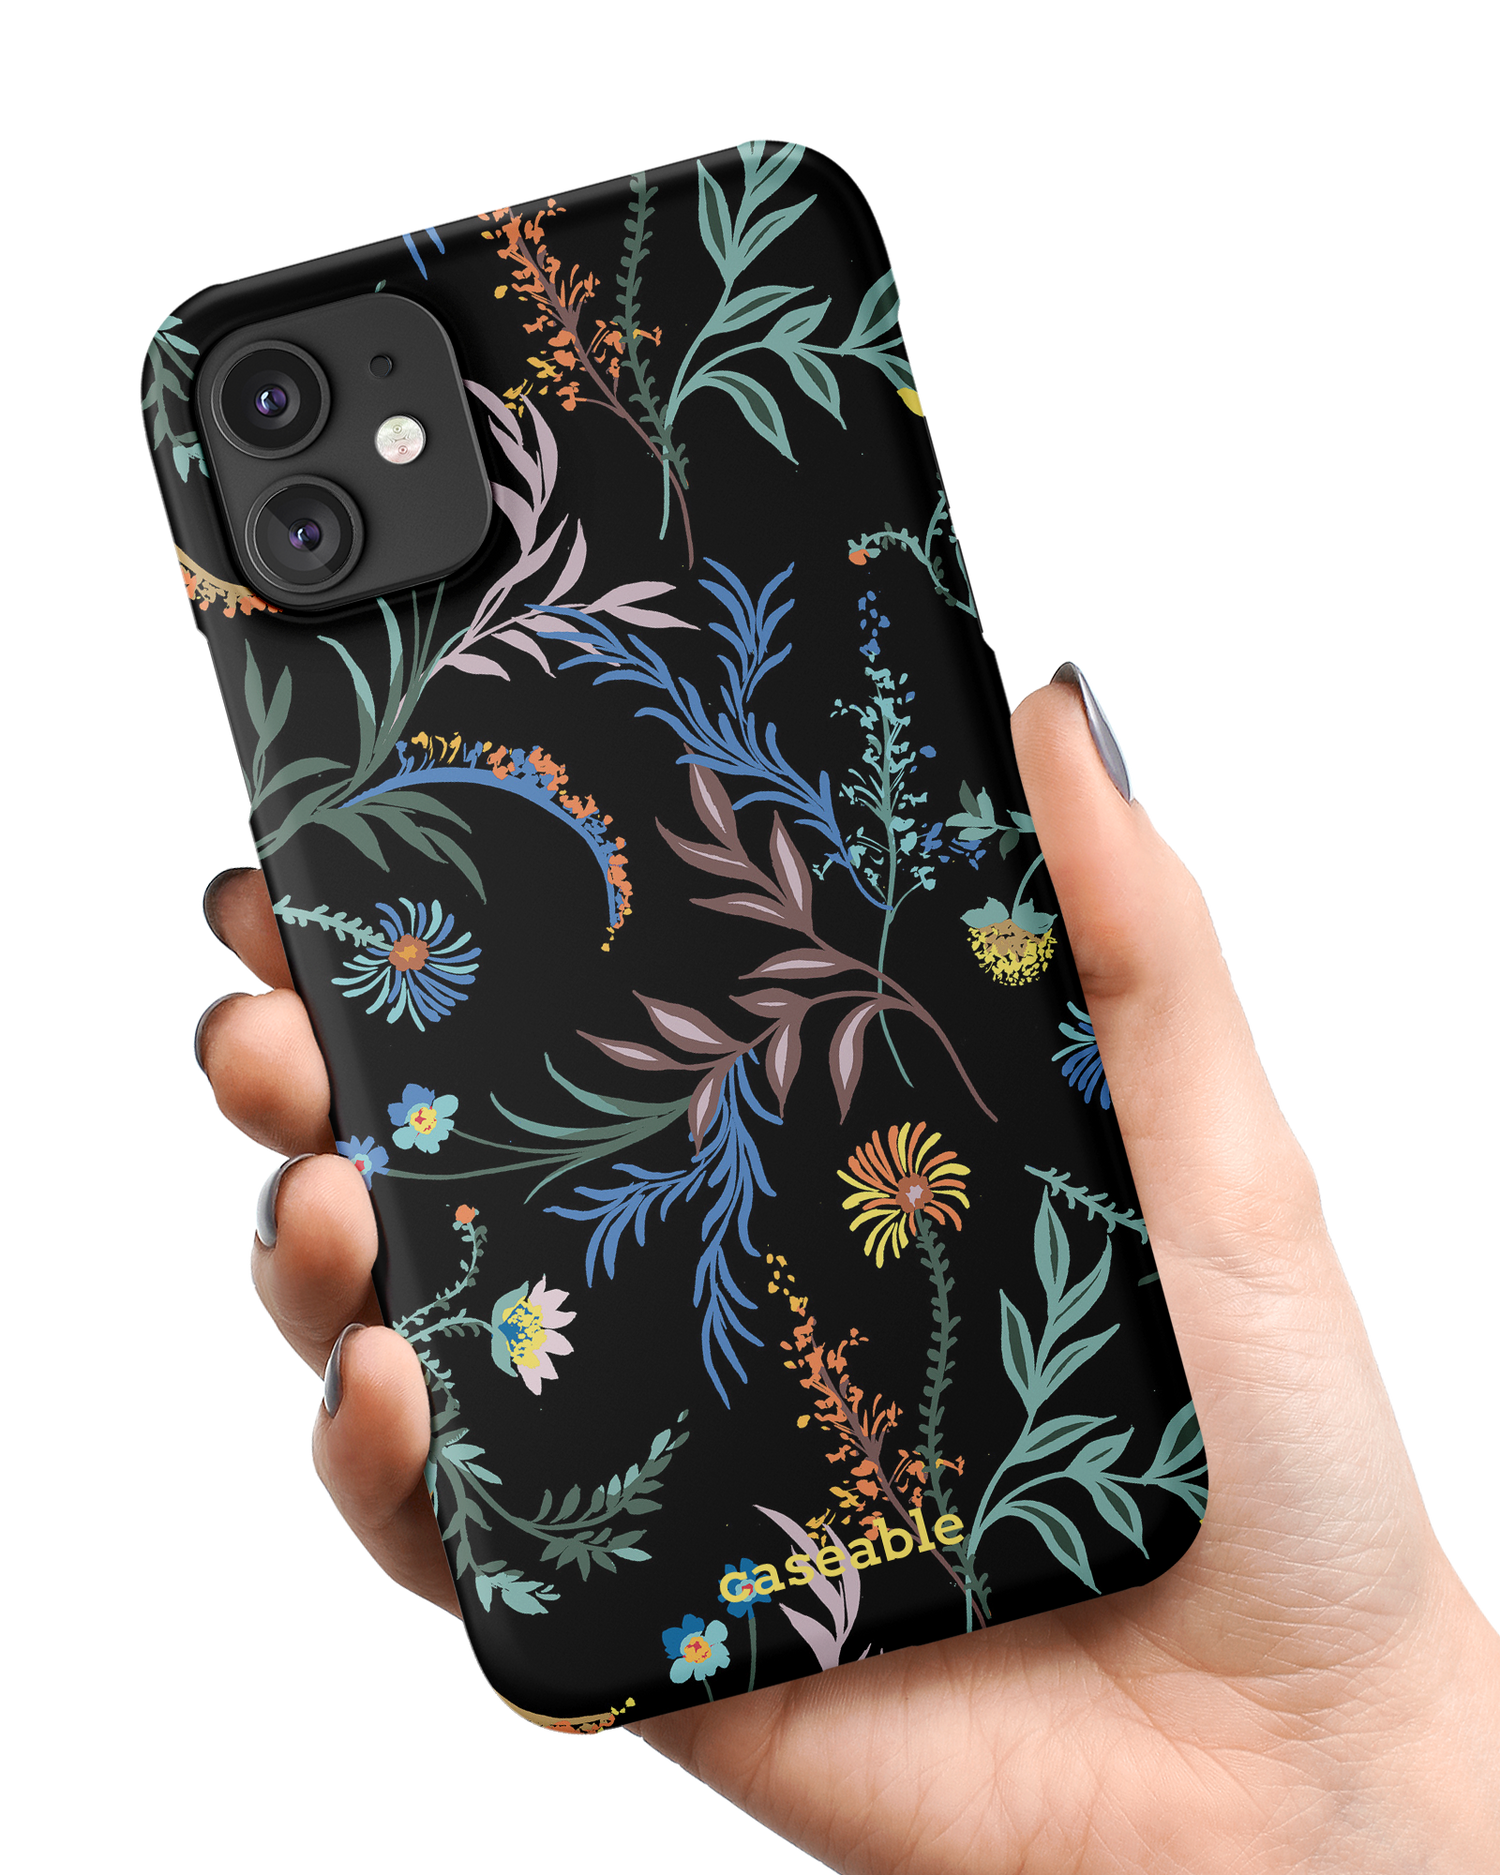 Woodland Spring Floral Hard Shell Phone Case Apple iPhone 11 held in hand